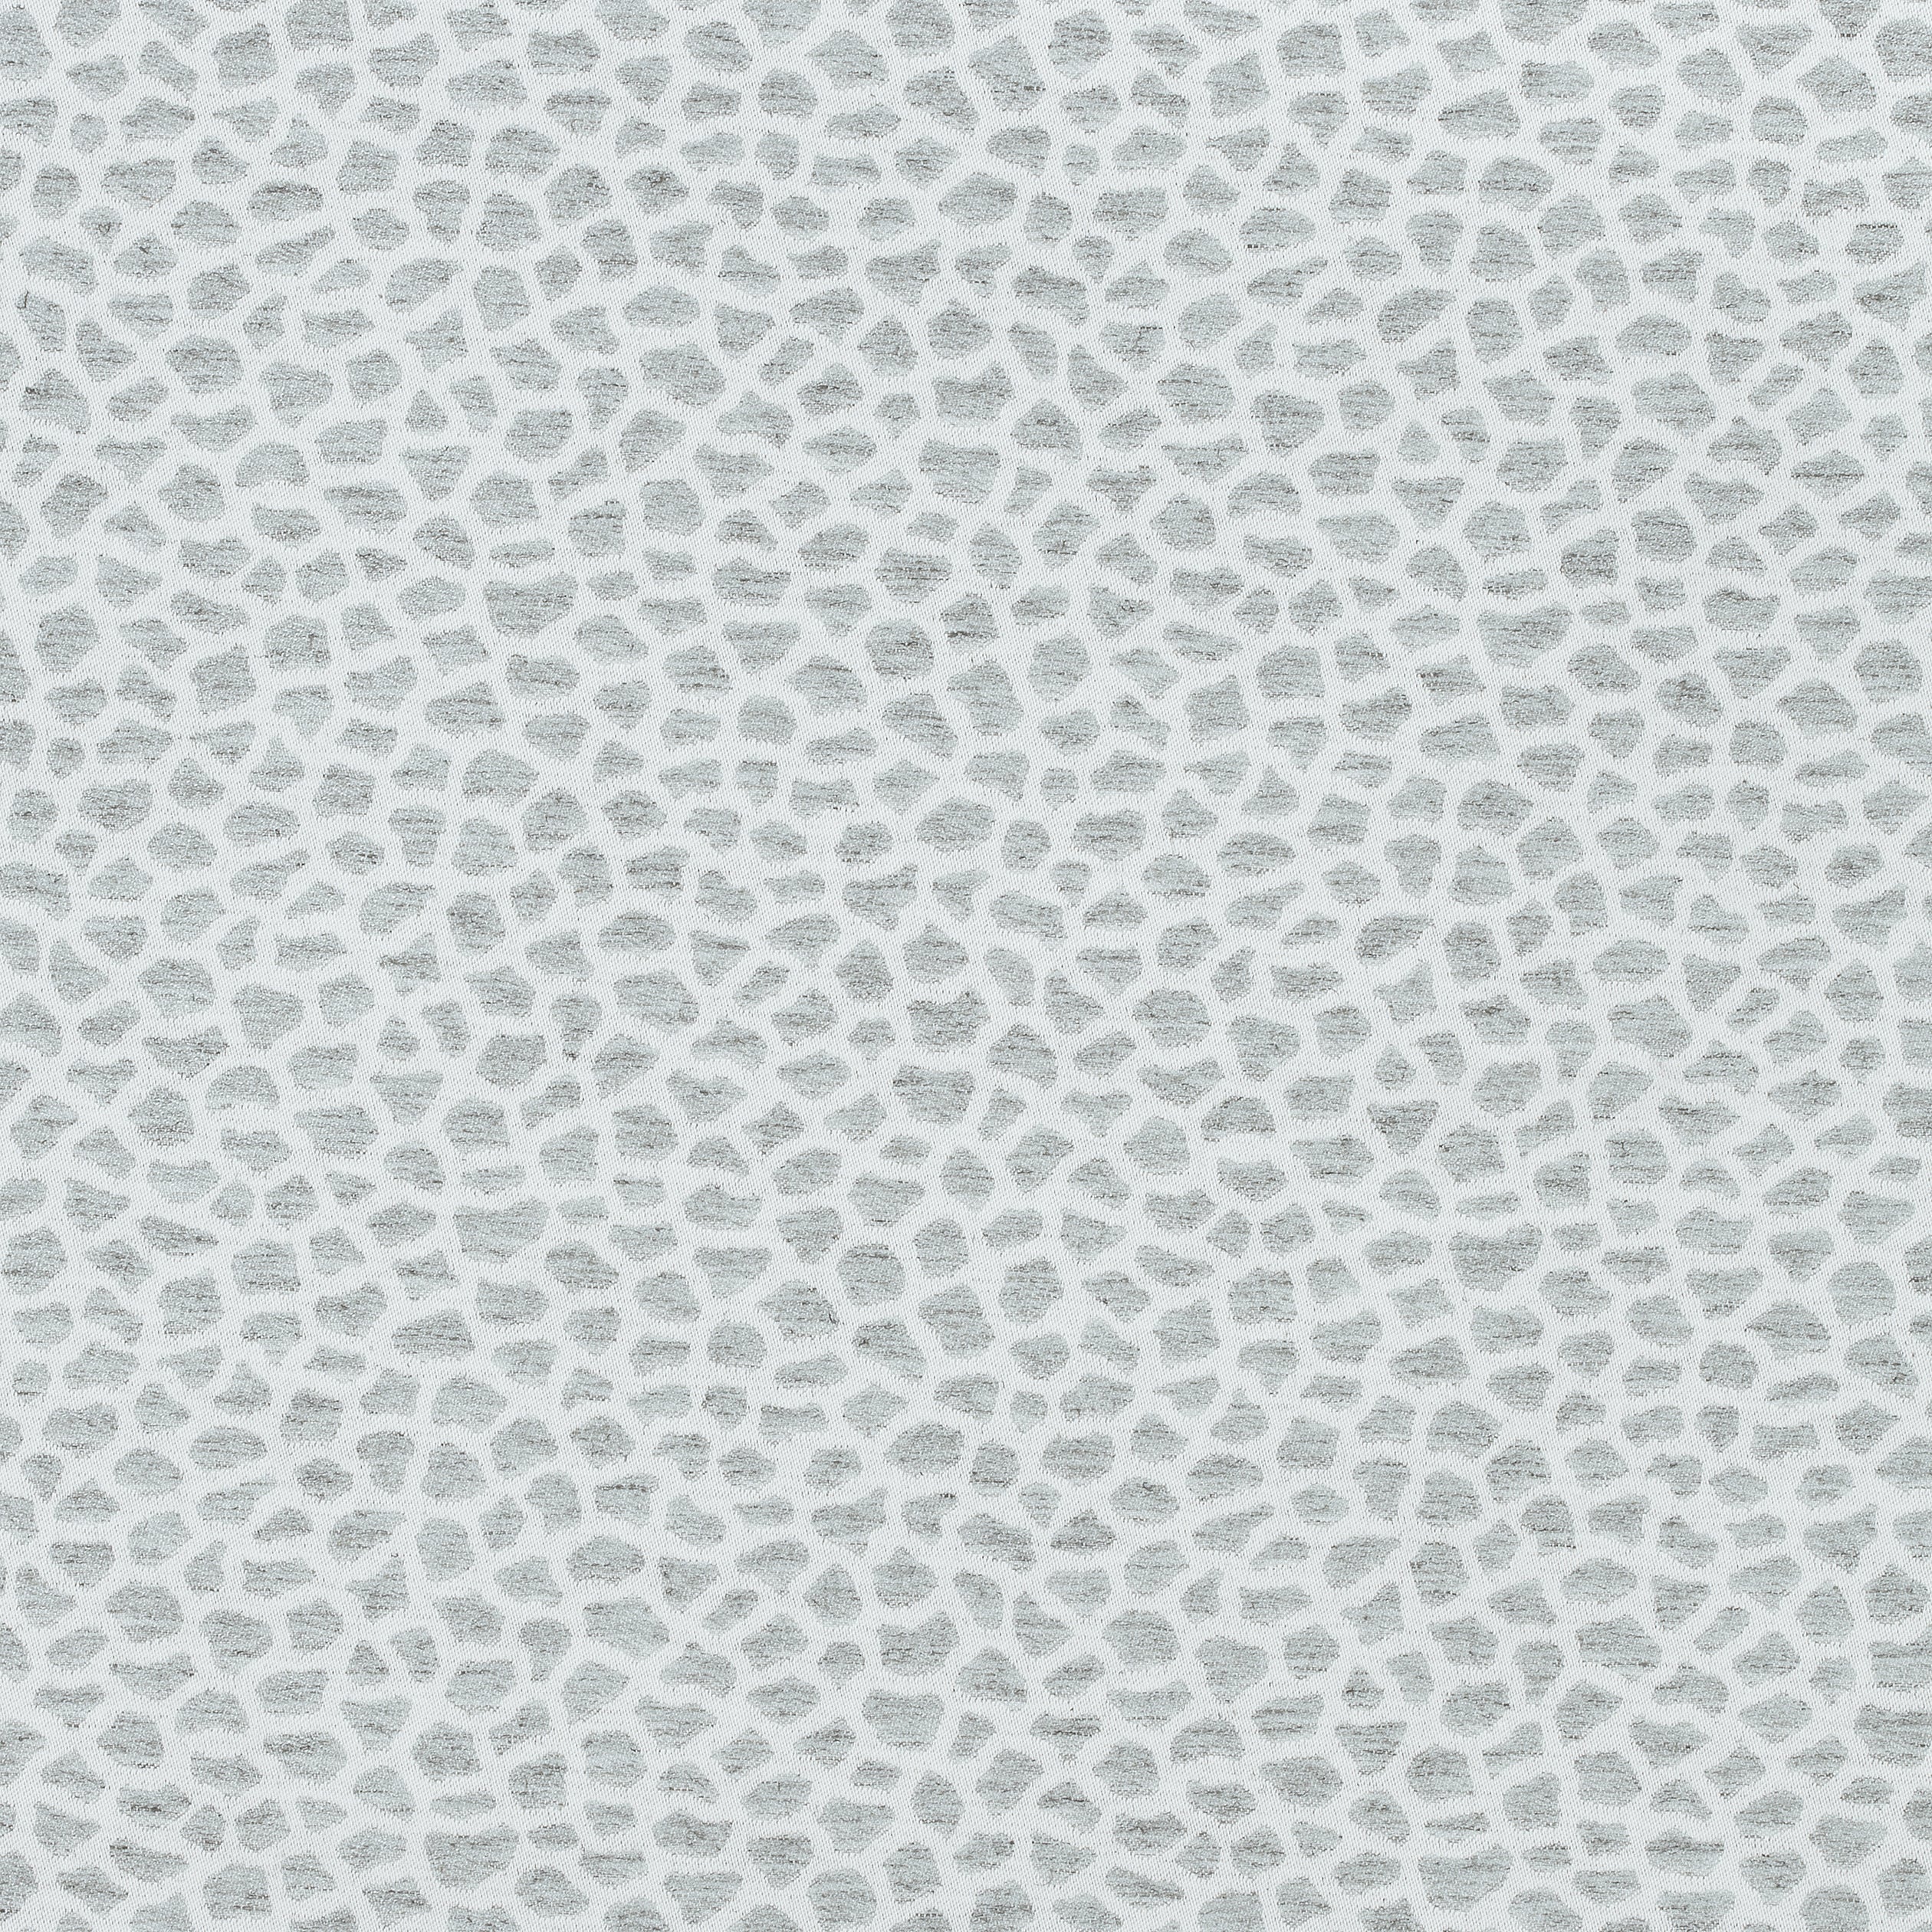 Masai fabric in fog color - pattern number W80421 - by Thibaut in the Woven Resource Vol 10 Menagerie collection